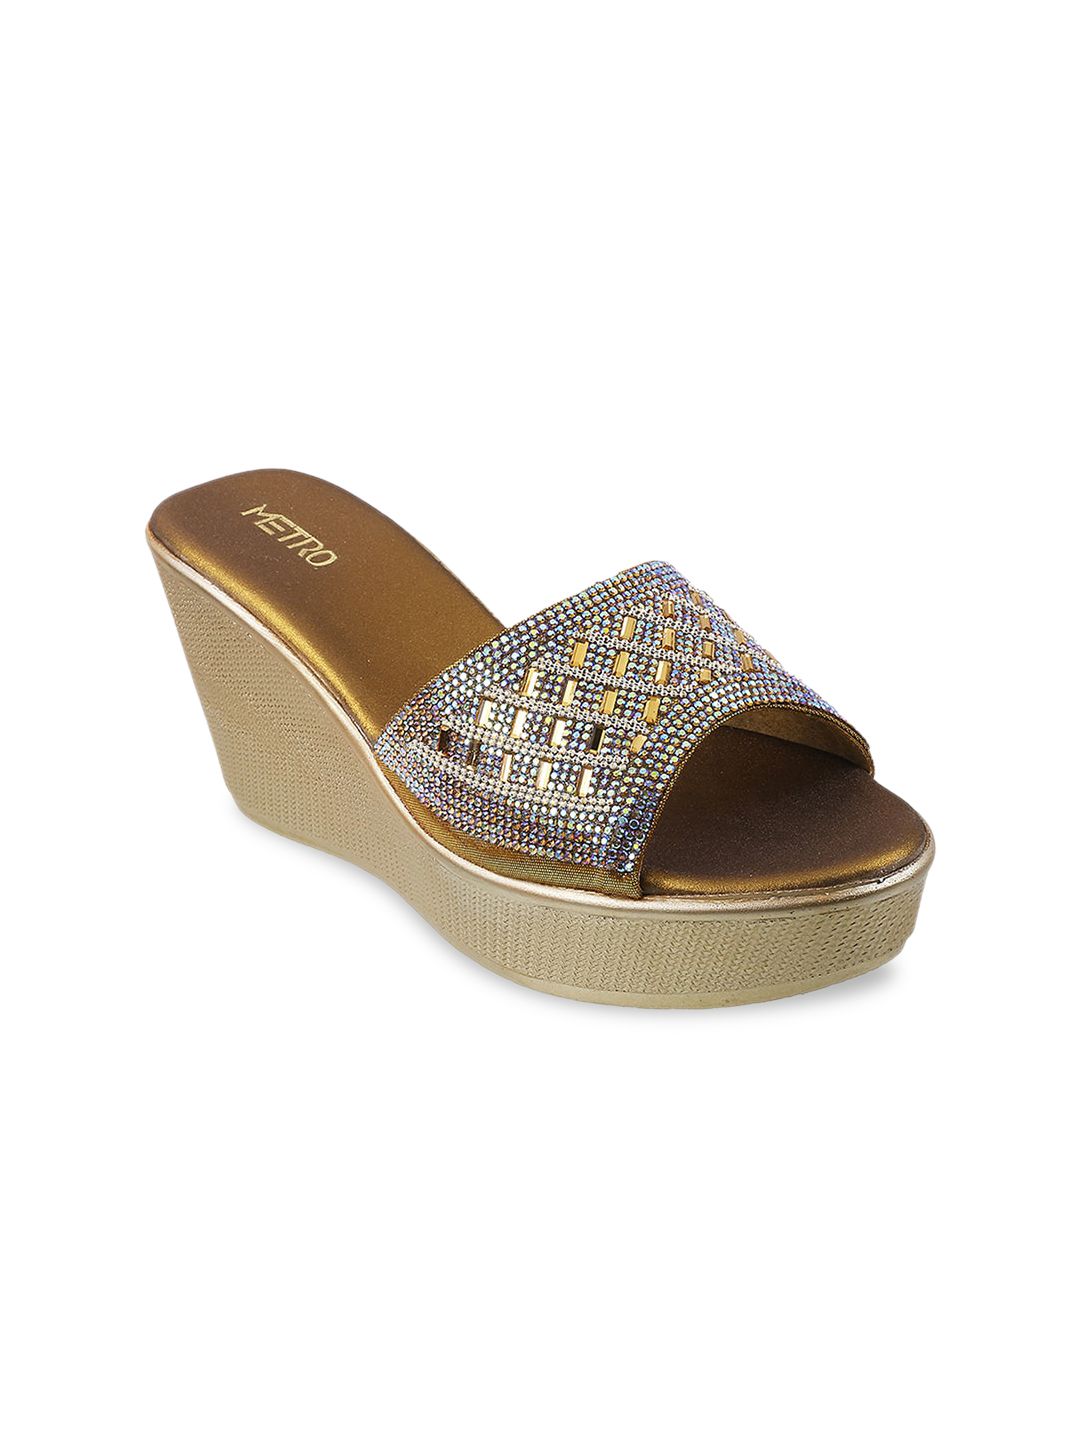 Metro Gold-Toned Embellished Wedge Sandals Price in India